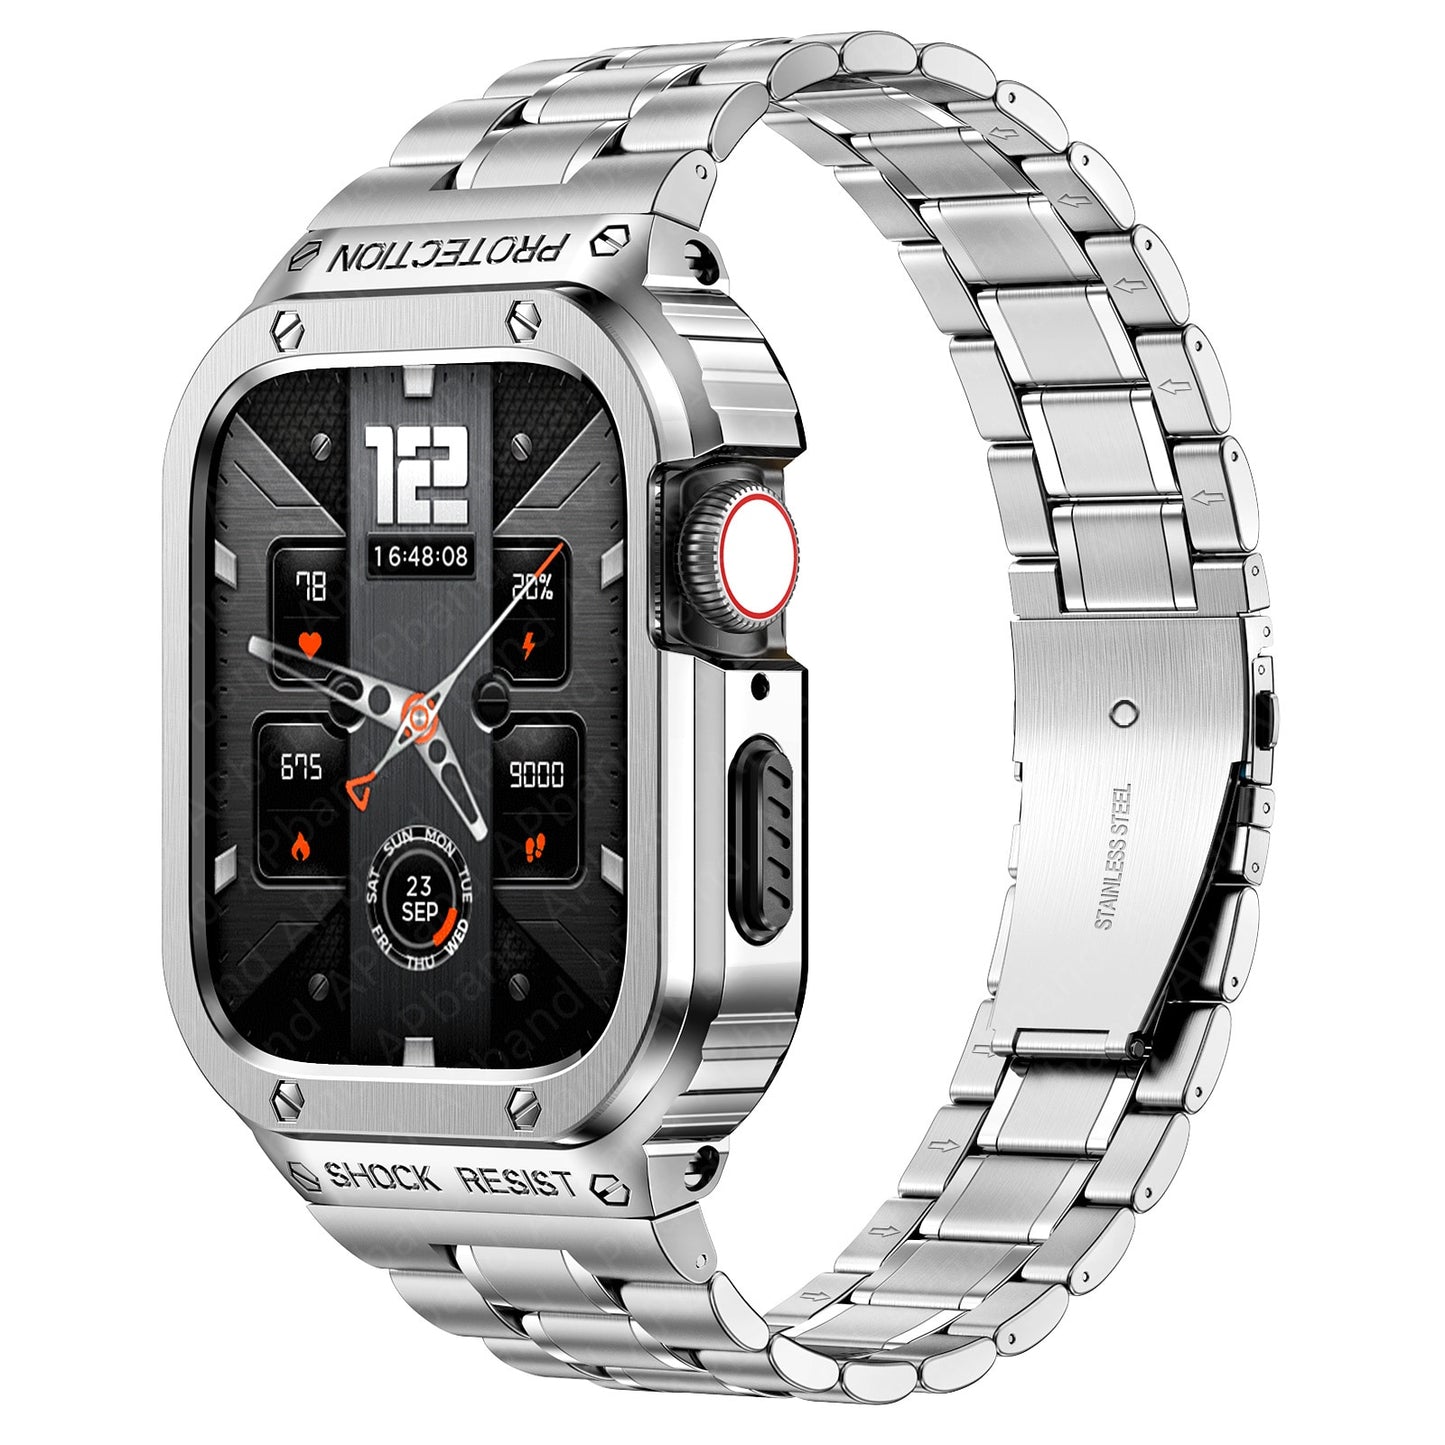 Apple Watch Stainless Steel Band and Protective Case